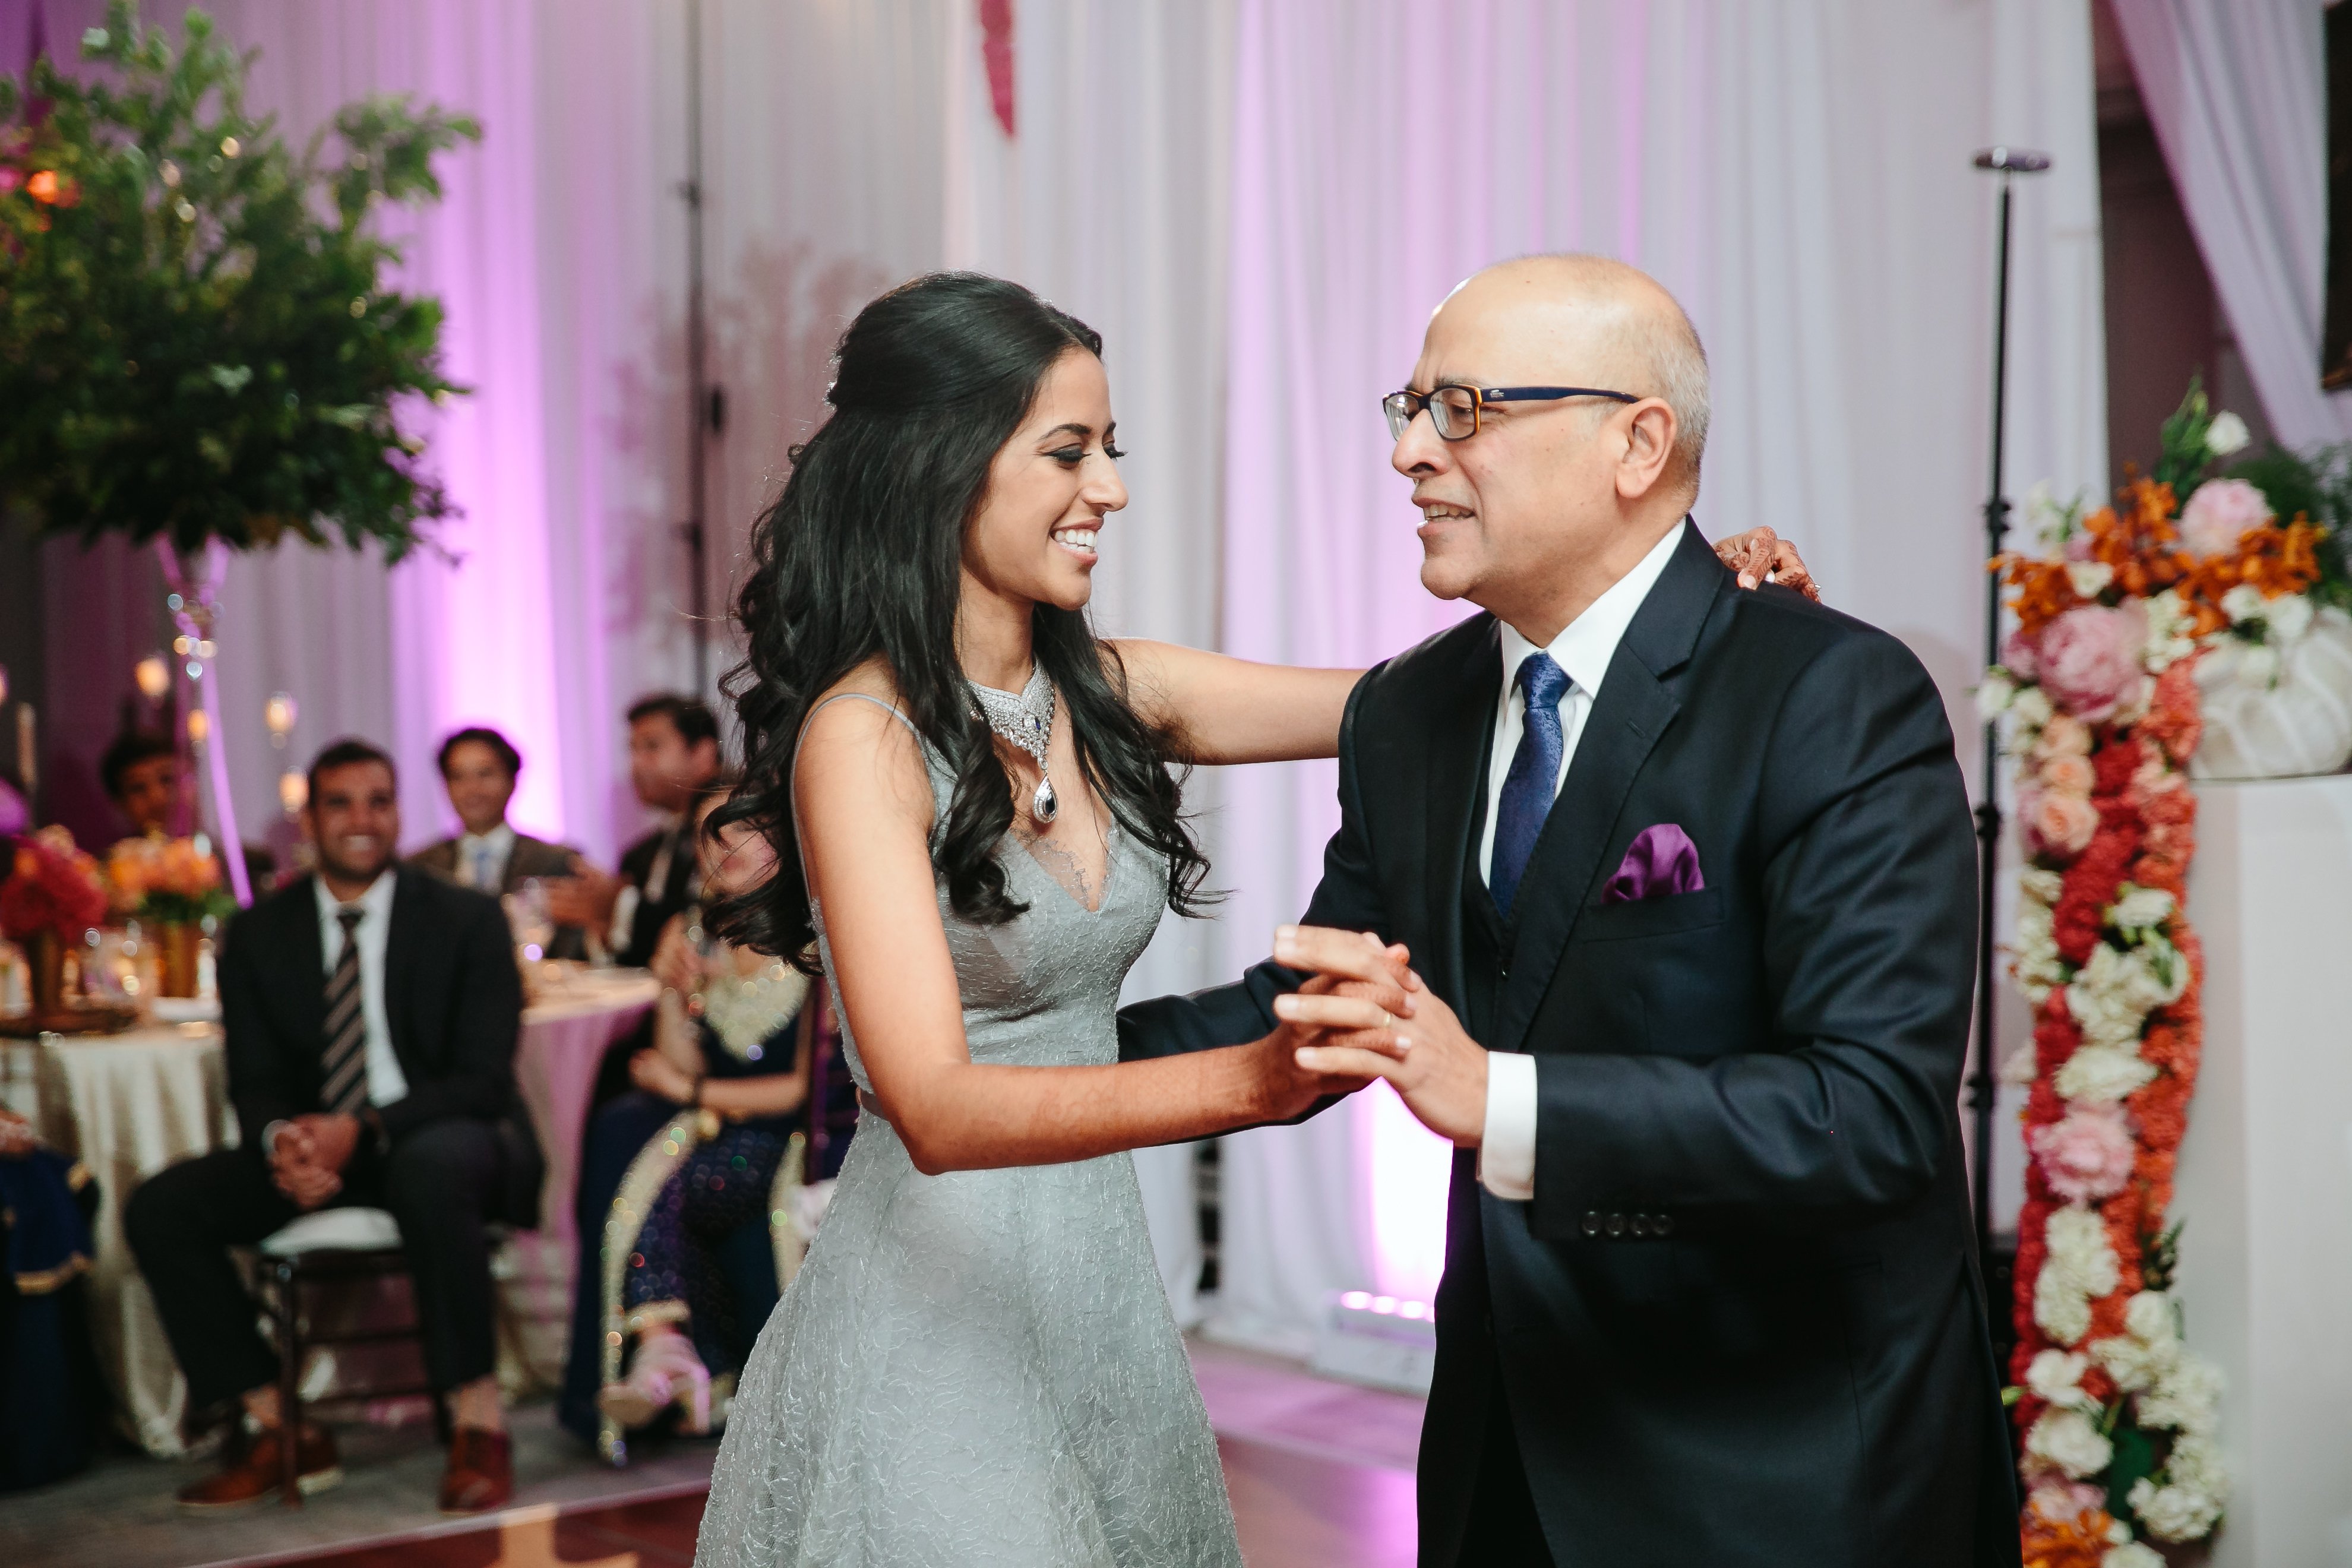 dave filip recommends hindi father daughter songs pic